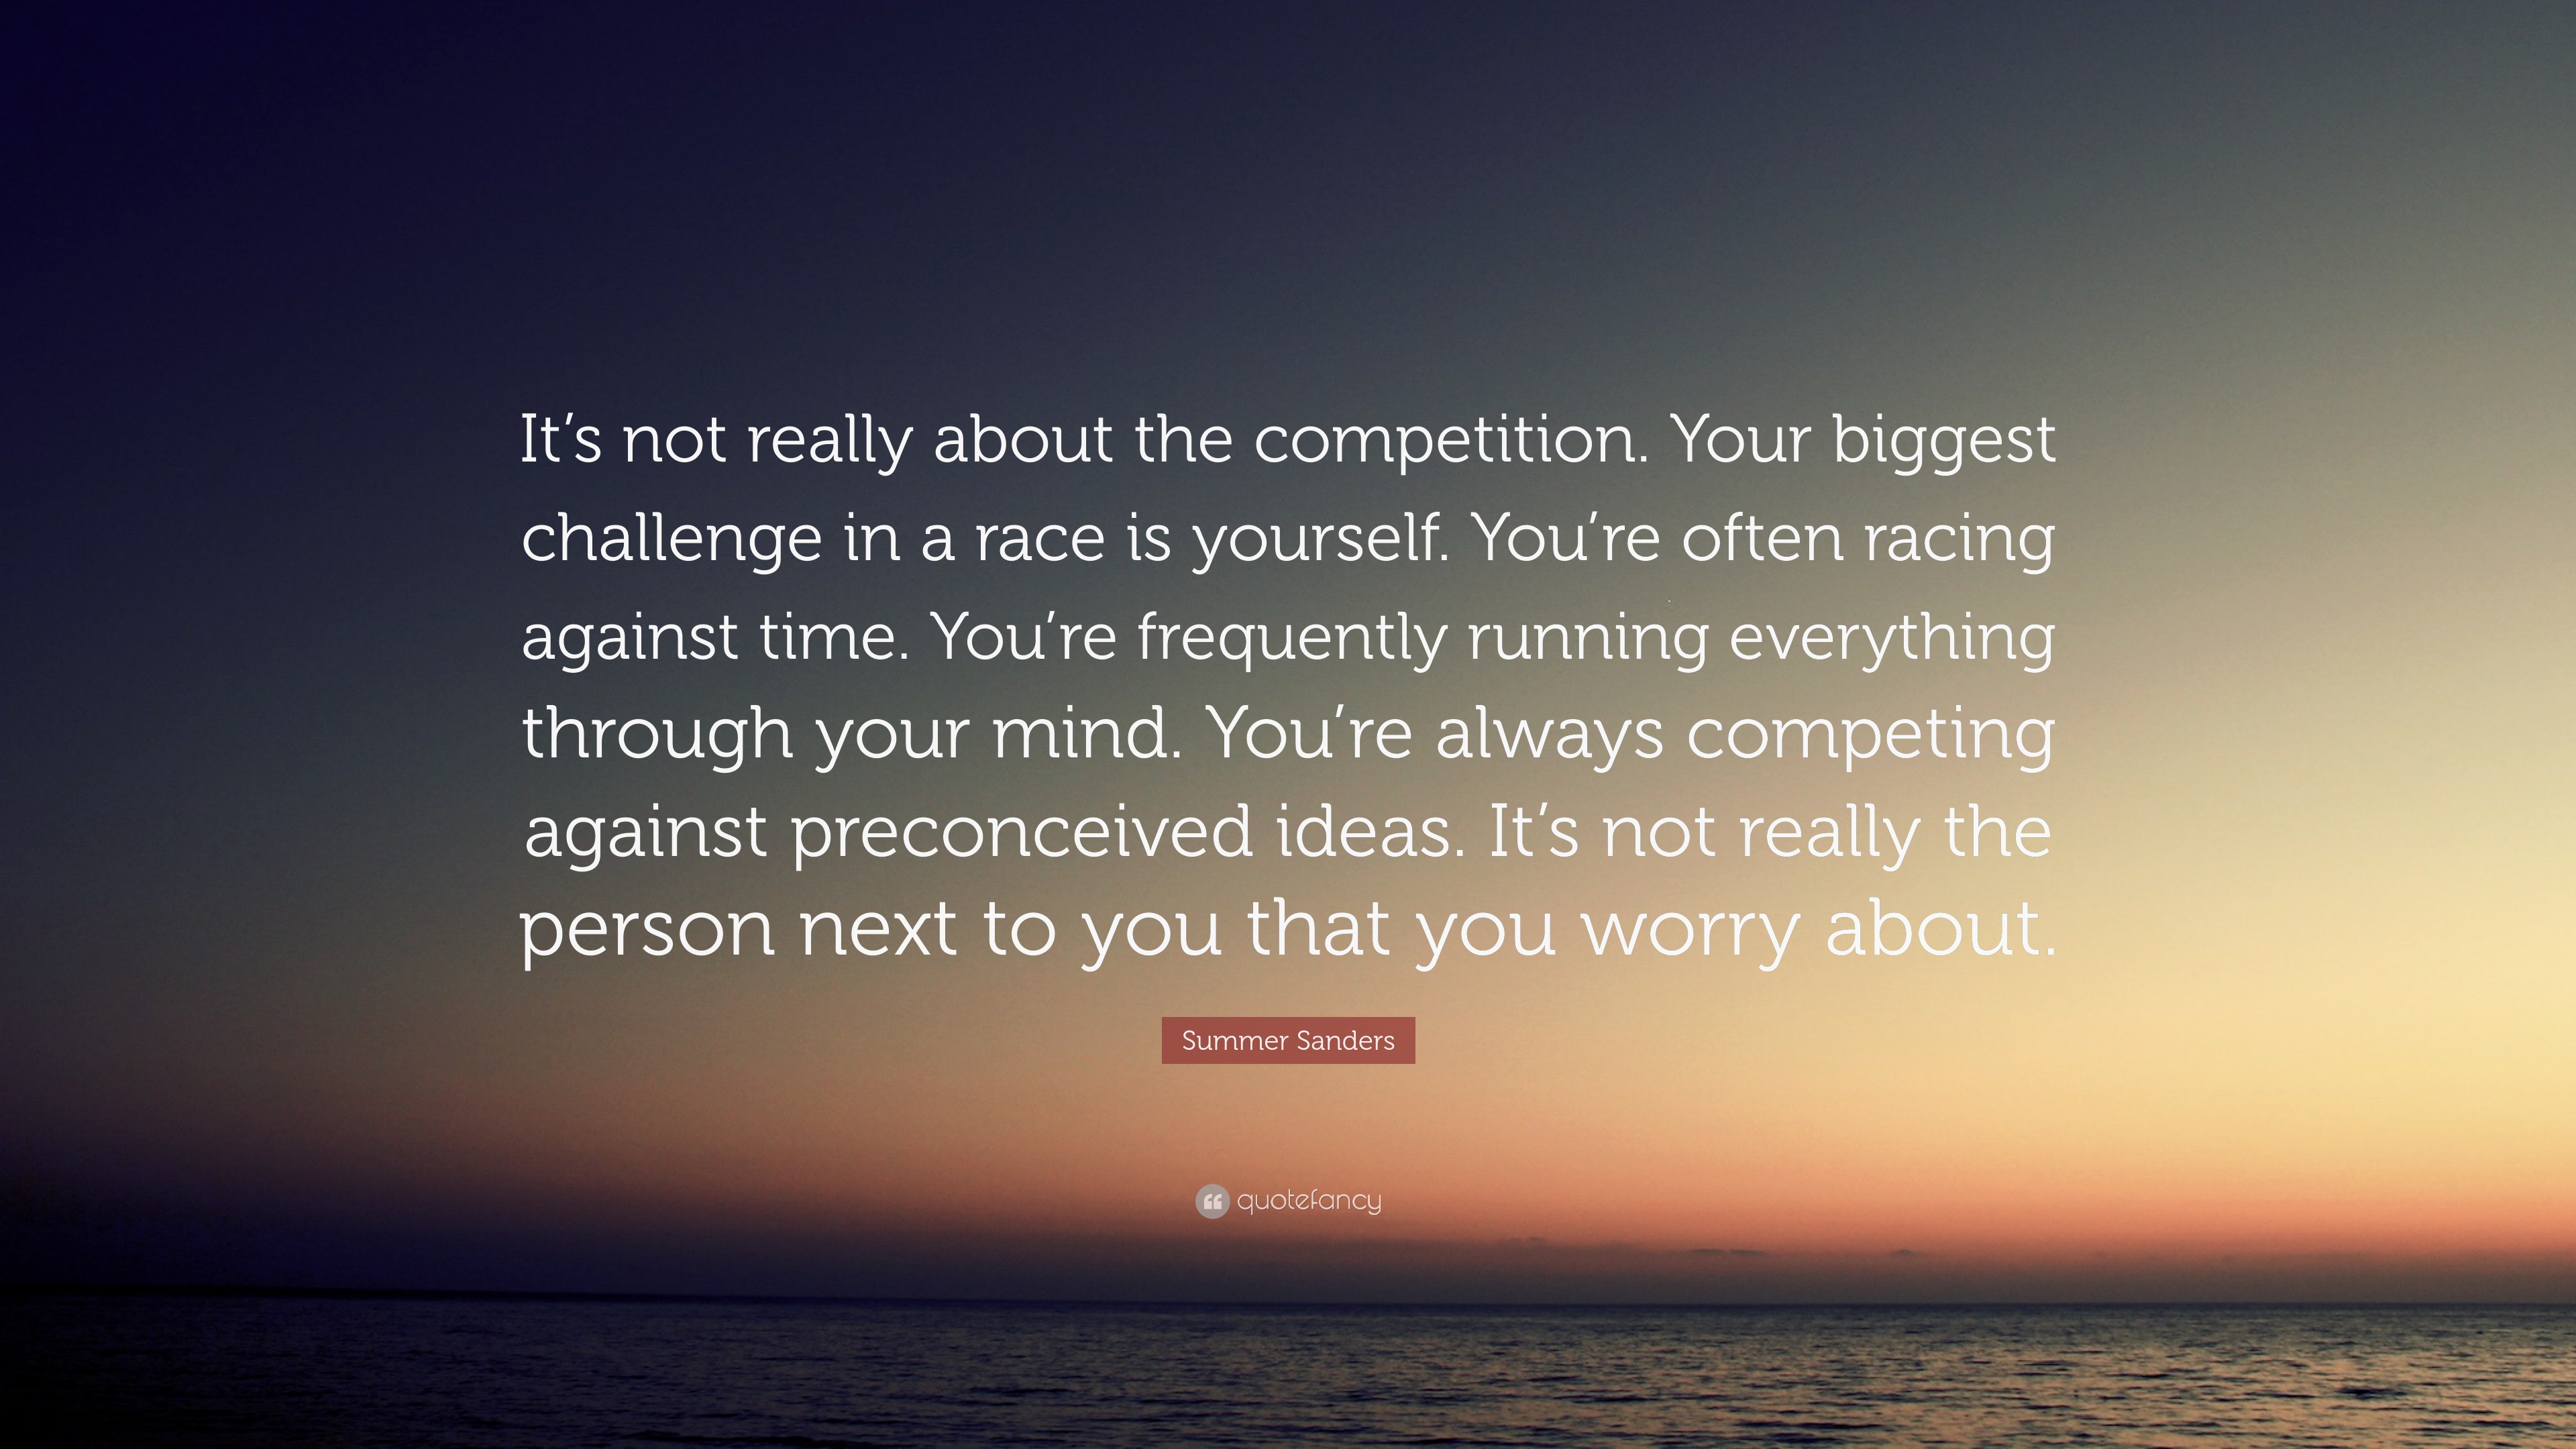 Summer Sanders Quote: “It's not really about the competition. Your